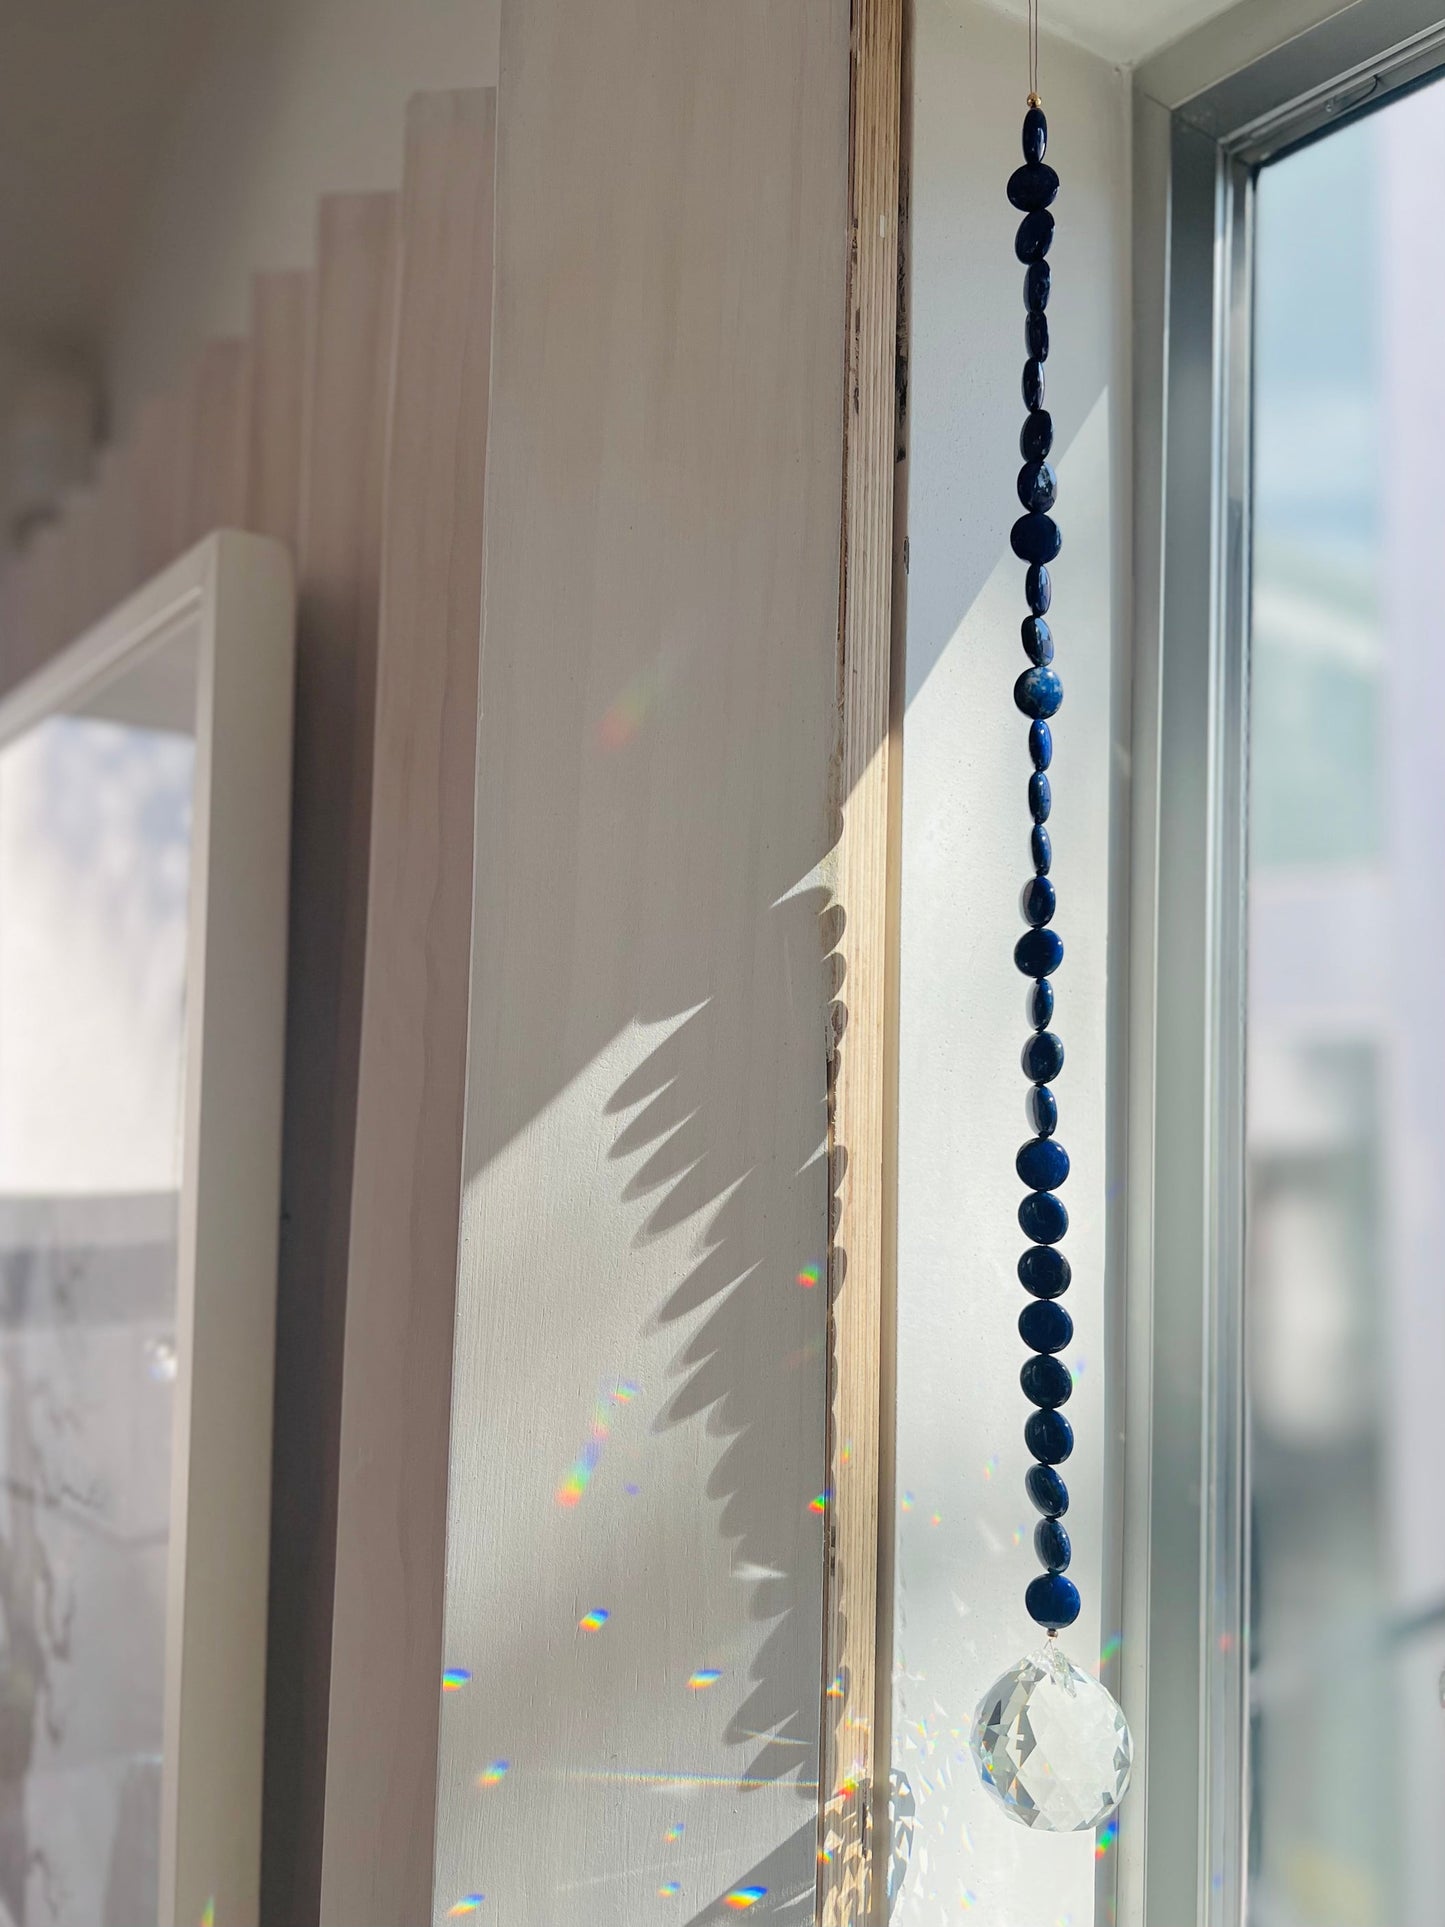 Lapis Lazuli window prism transforms any space into a zen den - hang in a sunny spot & watch the rainbows dance! Disk shaped beads twist when hung, revealing a moon phase pattern ~  Designed in California by Carrie Marill.